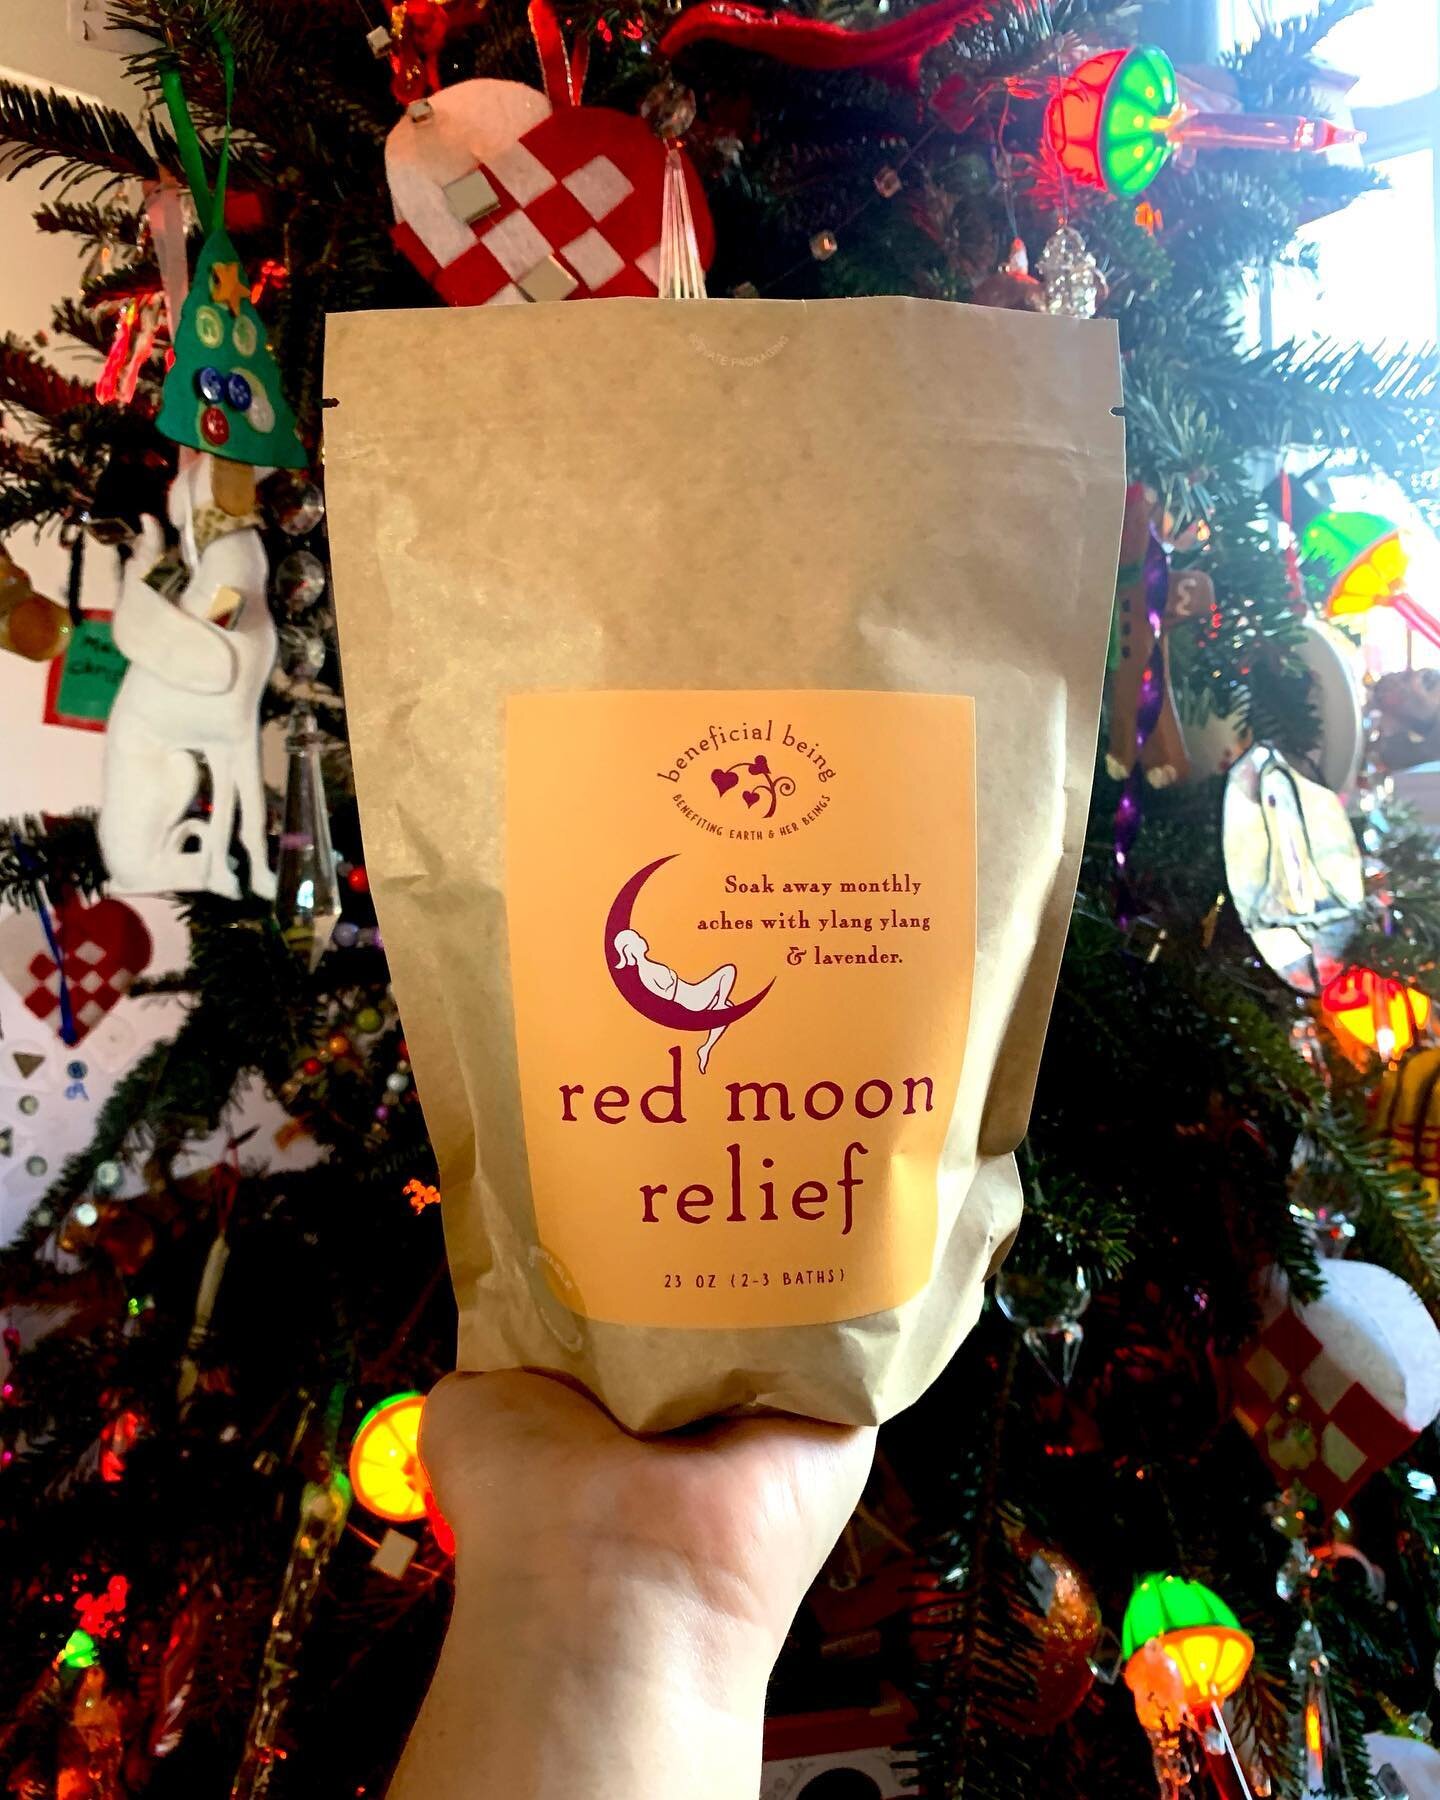 I think my mix of Red Moon Relief looks very festive against my Christmas tree. Speaking of festive, make sure to catch me at the Carolina Inn Holiday Market! 🎄❄️ #beneficialbeing #redmoonrelief #bathsalts #environmentallyfriendly #carolinainnholida